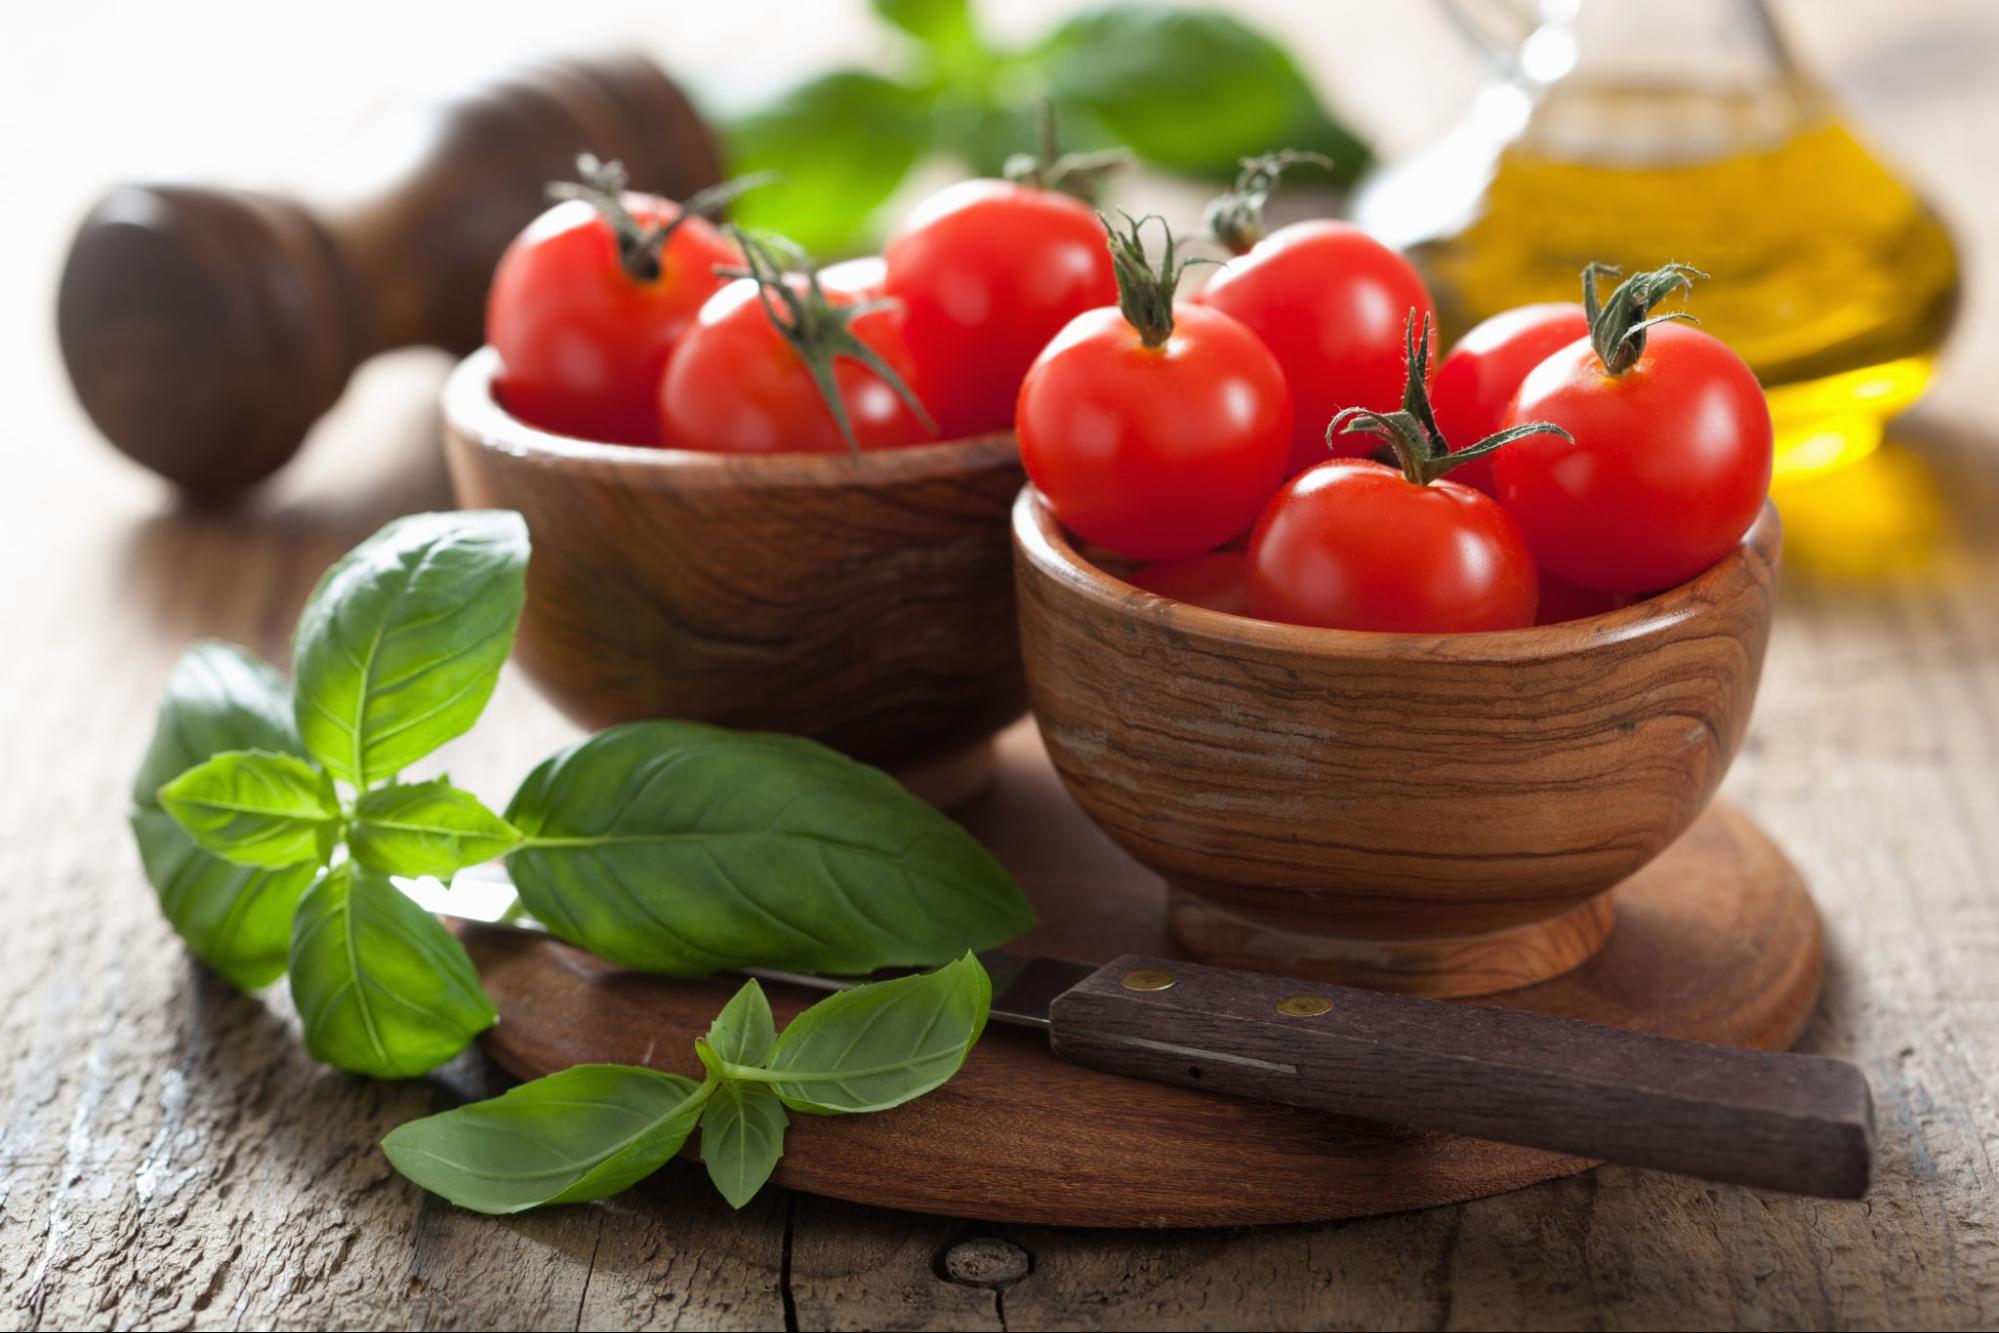 Cherry tomatoes are a tiny and delicious type of tomatoes.